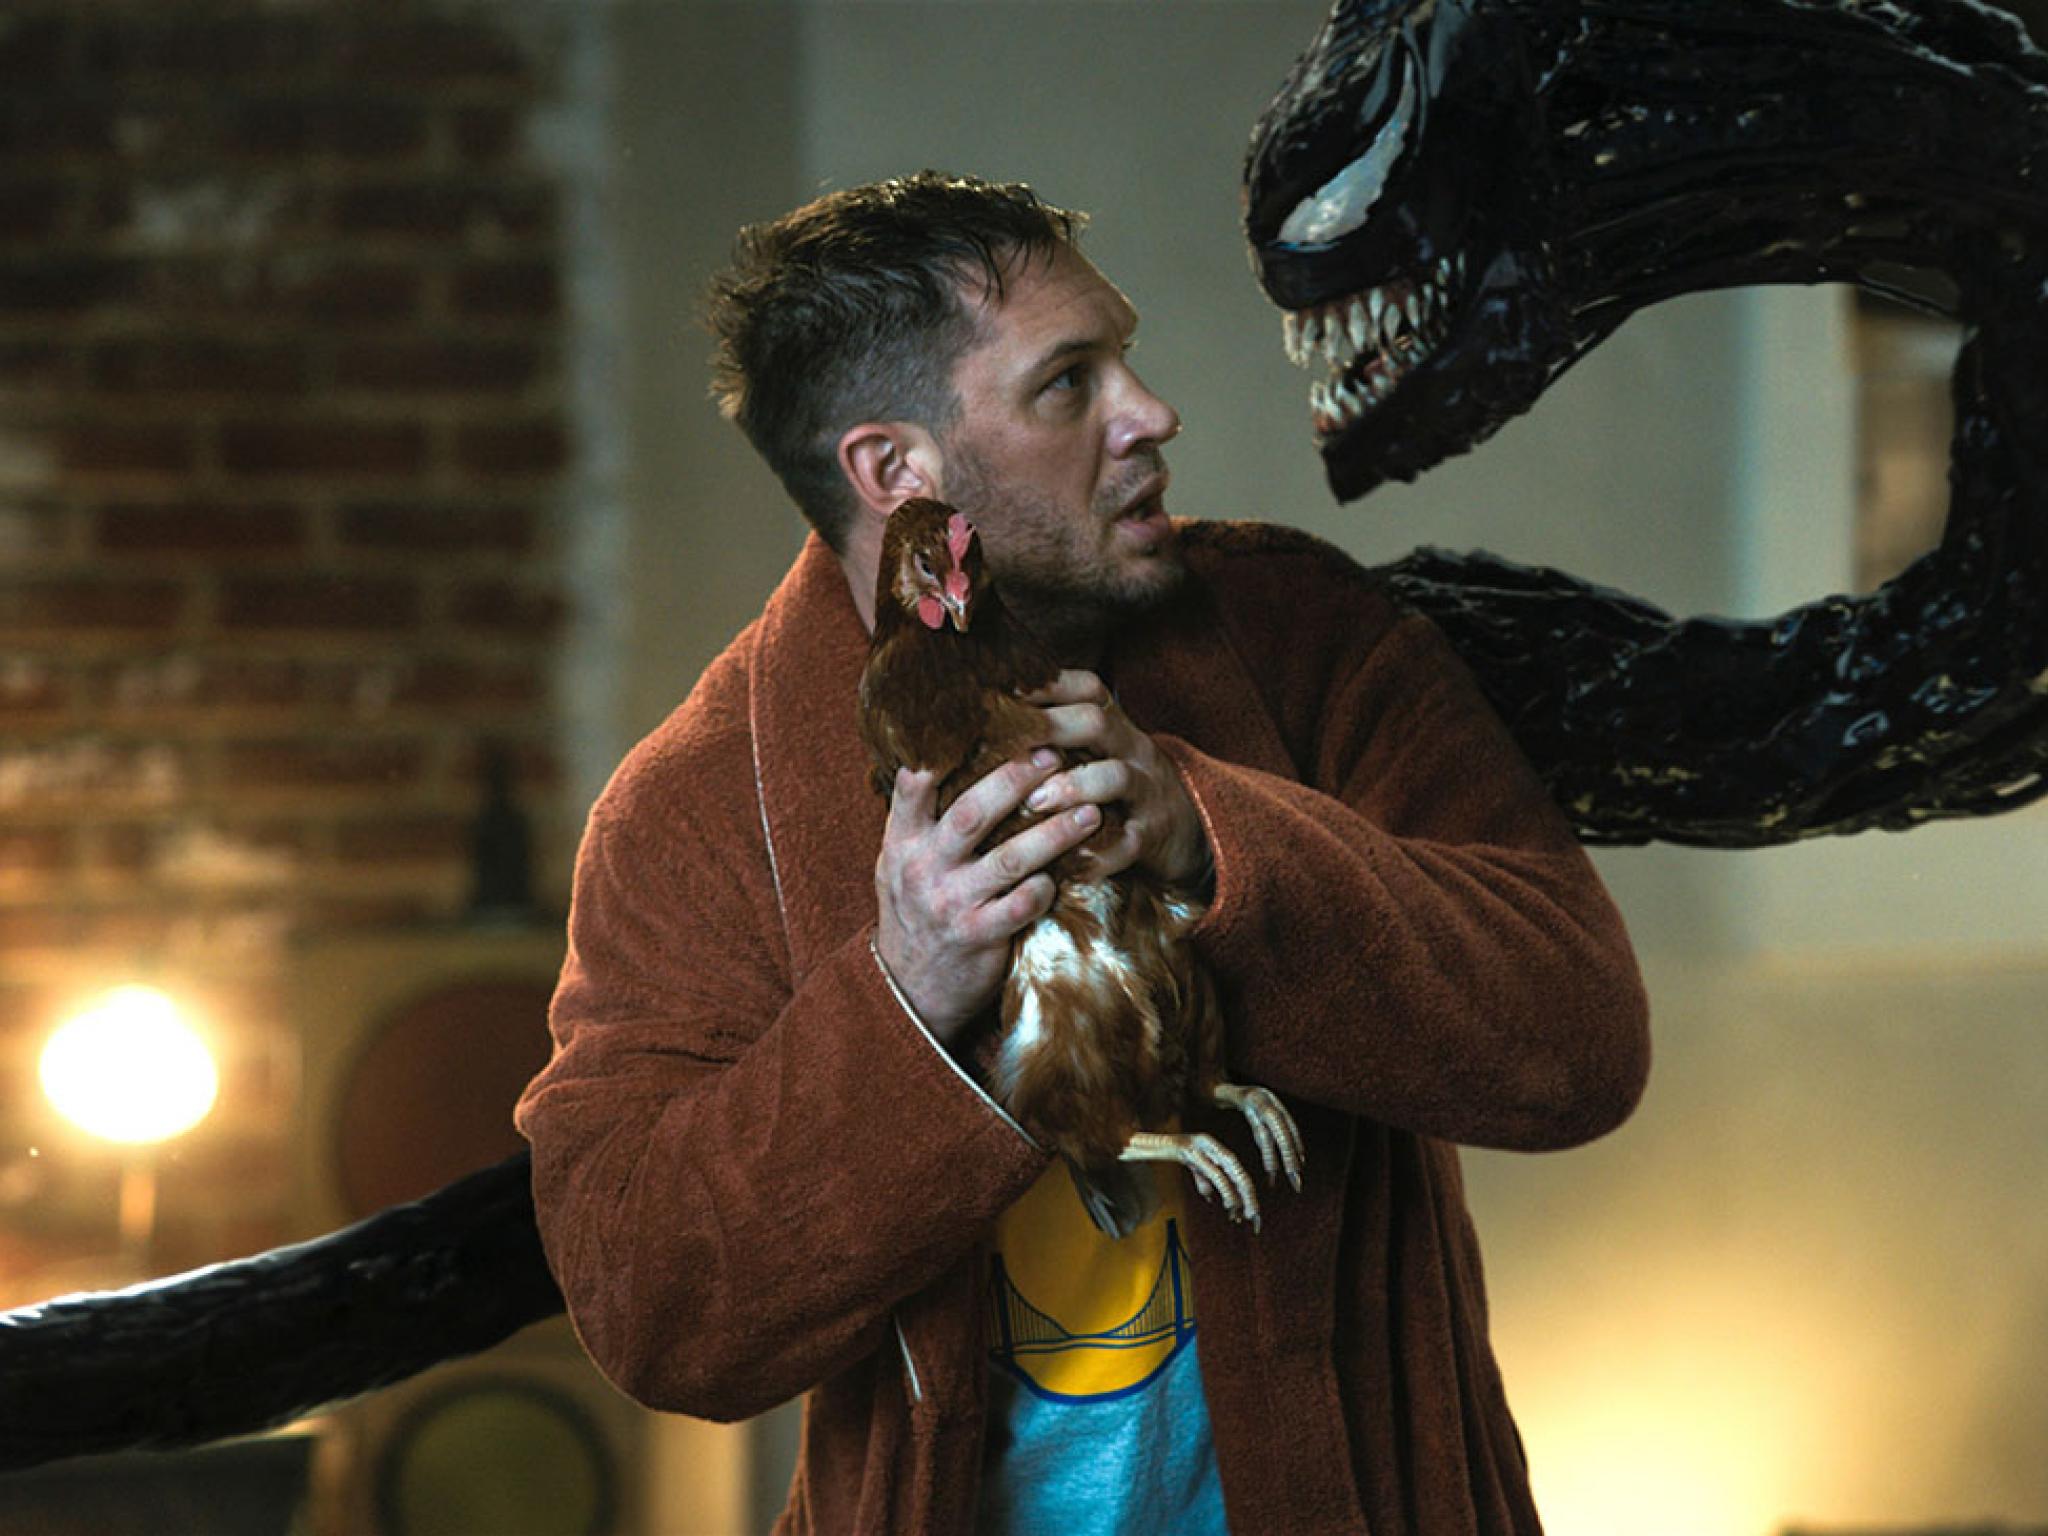  venom-let-there-be-carnage-shatters-pandemic-era-box-office-with-901m-opening-weekend 